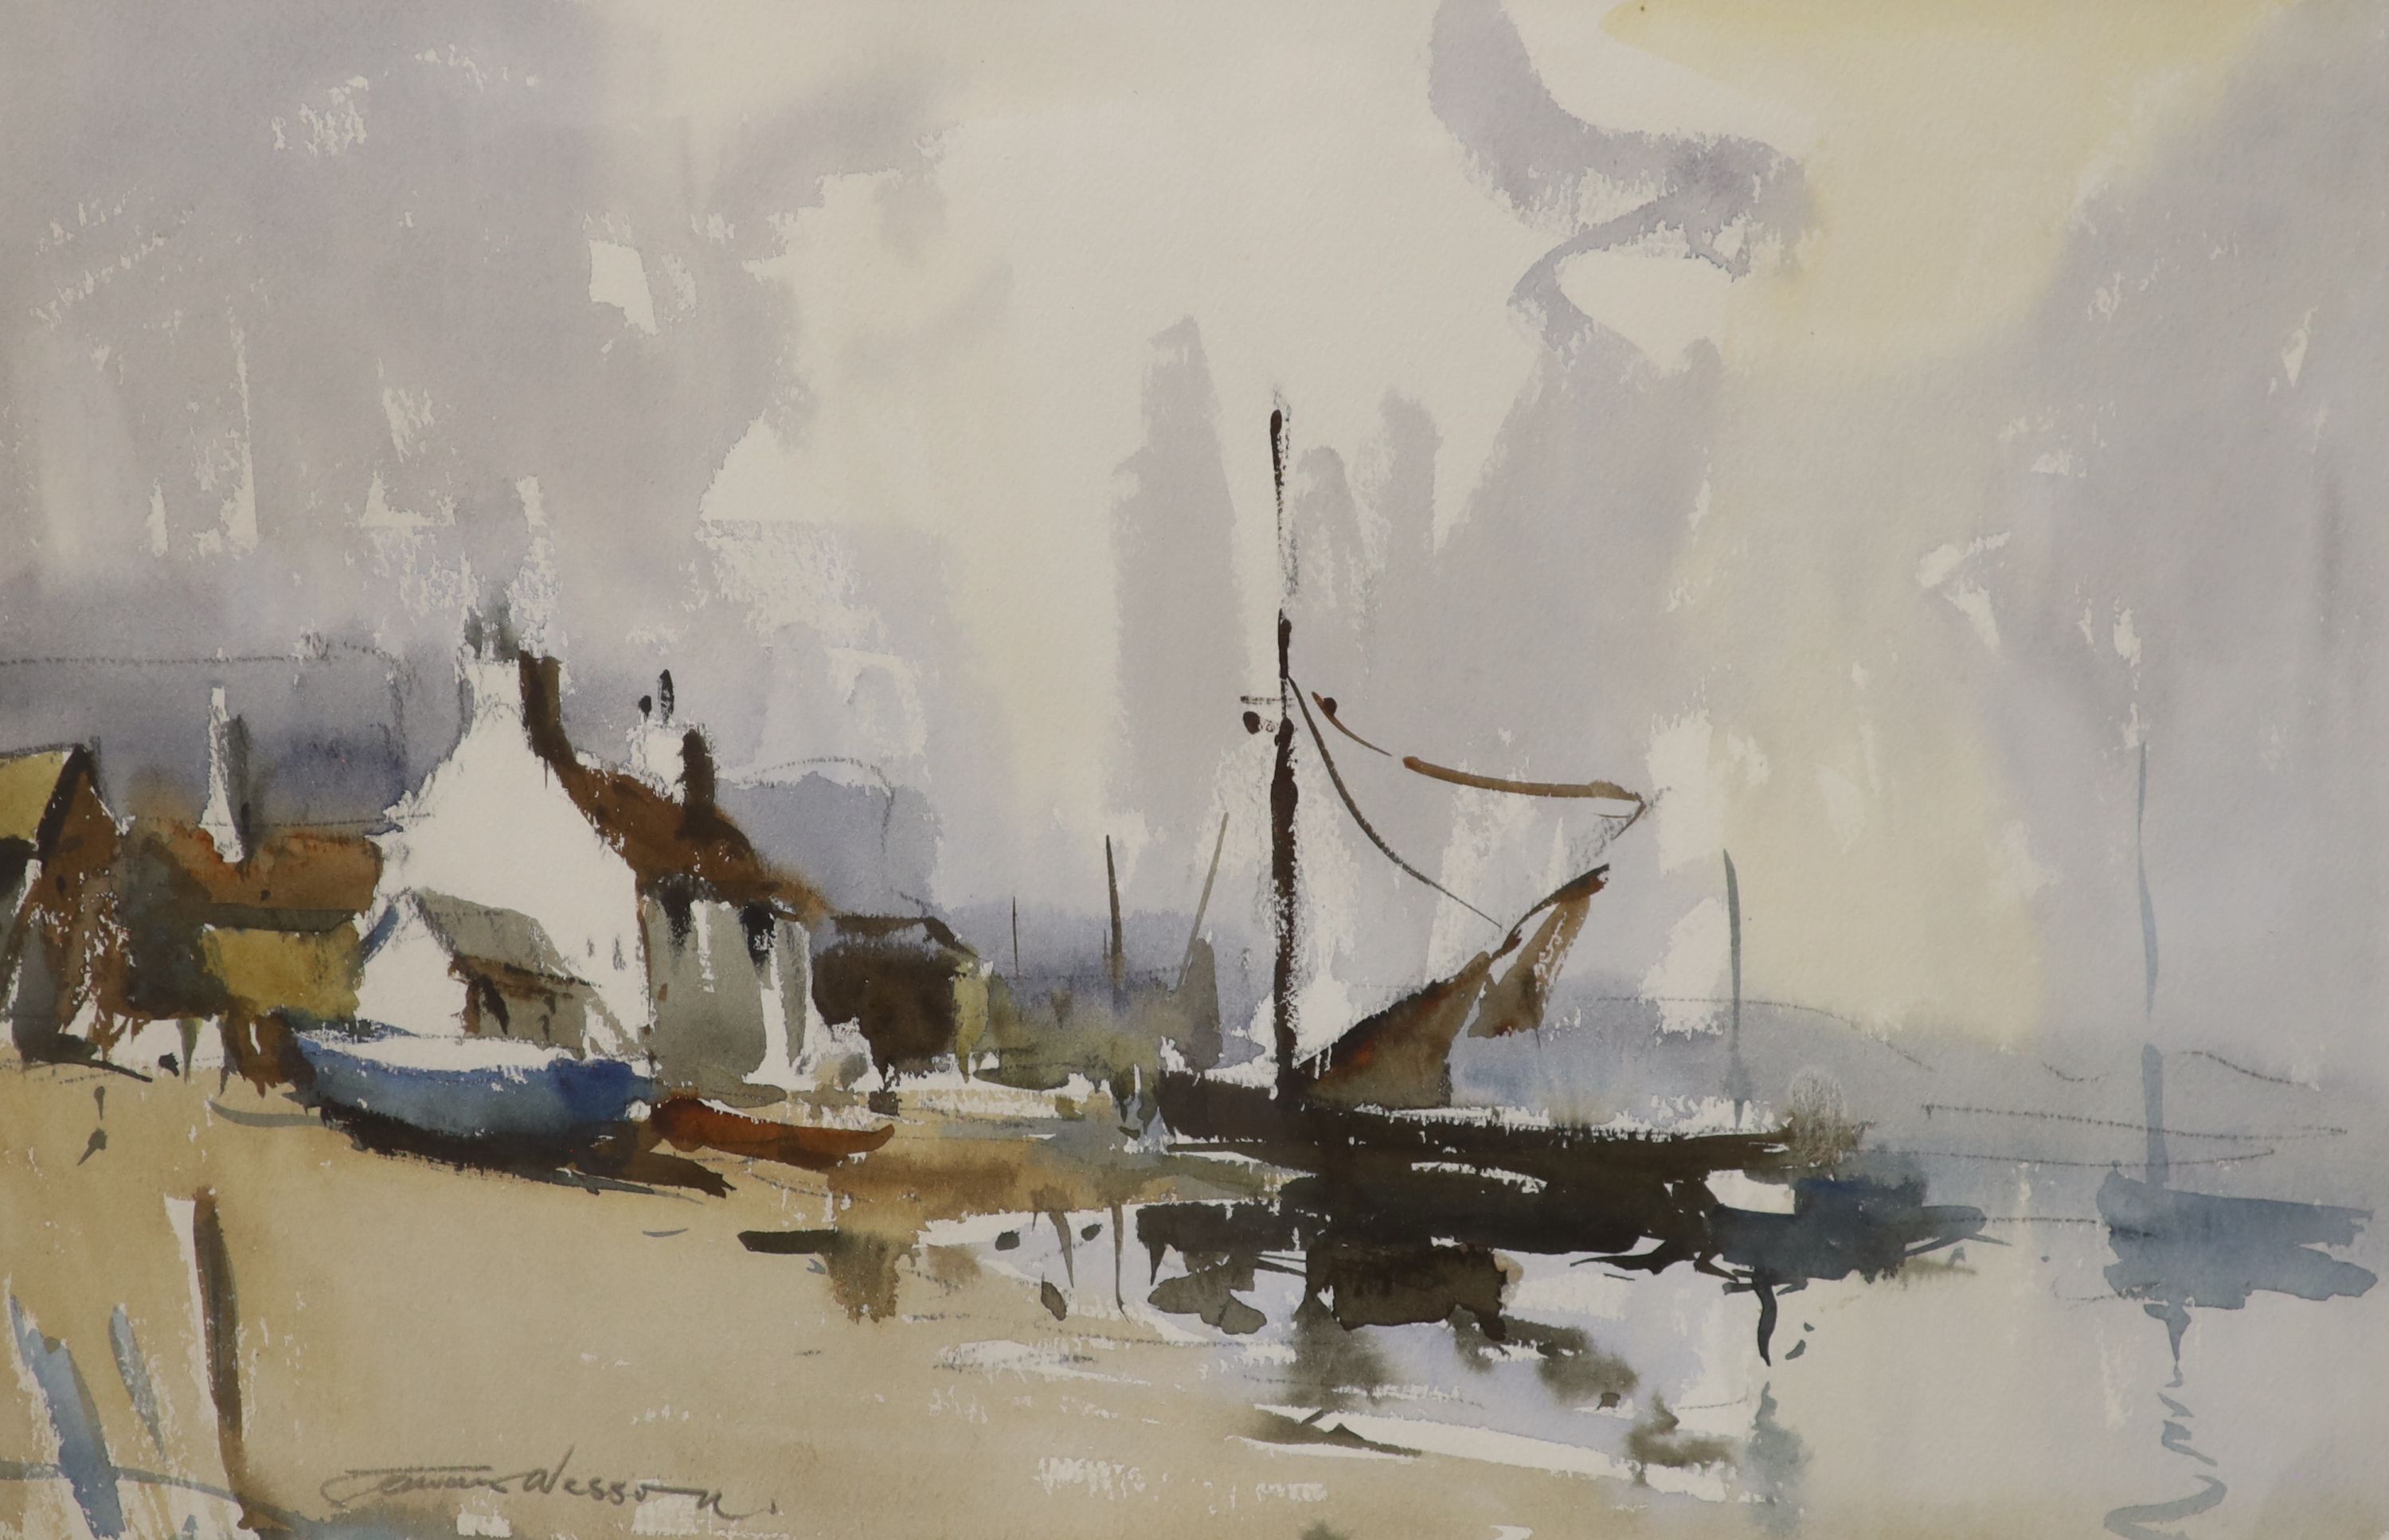 Edward Wesson (1910-1983), watercolour, Fishing village with sail barge, signed, 32 x 49cm